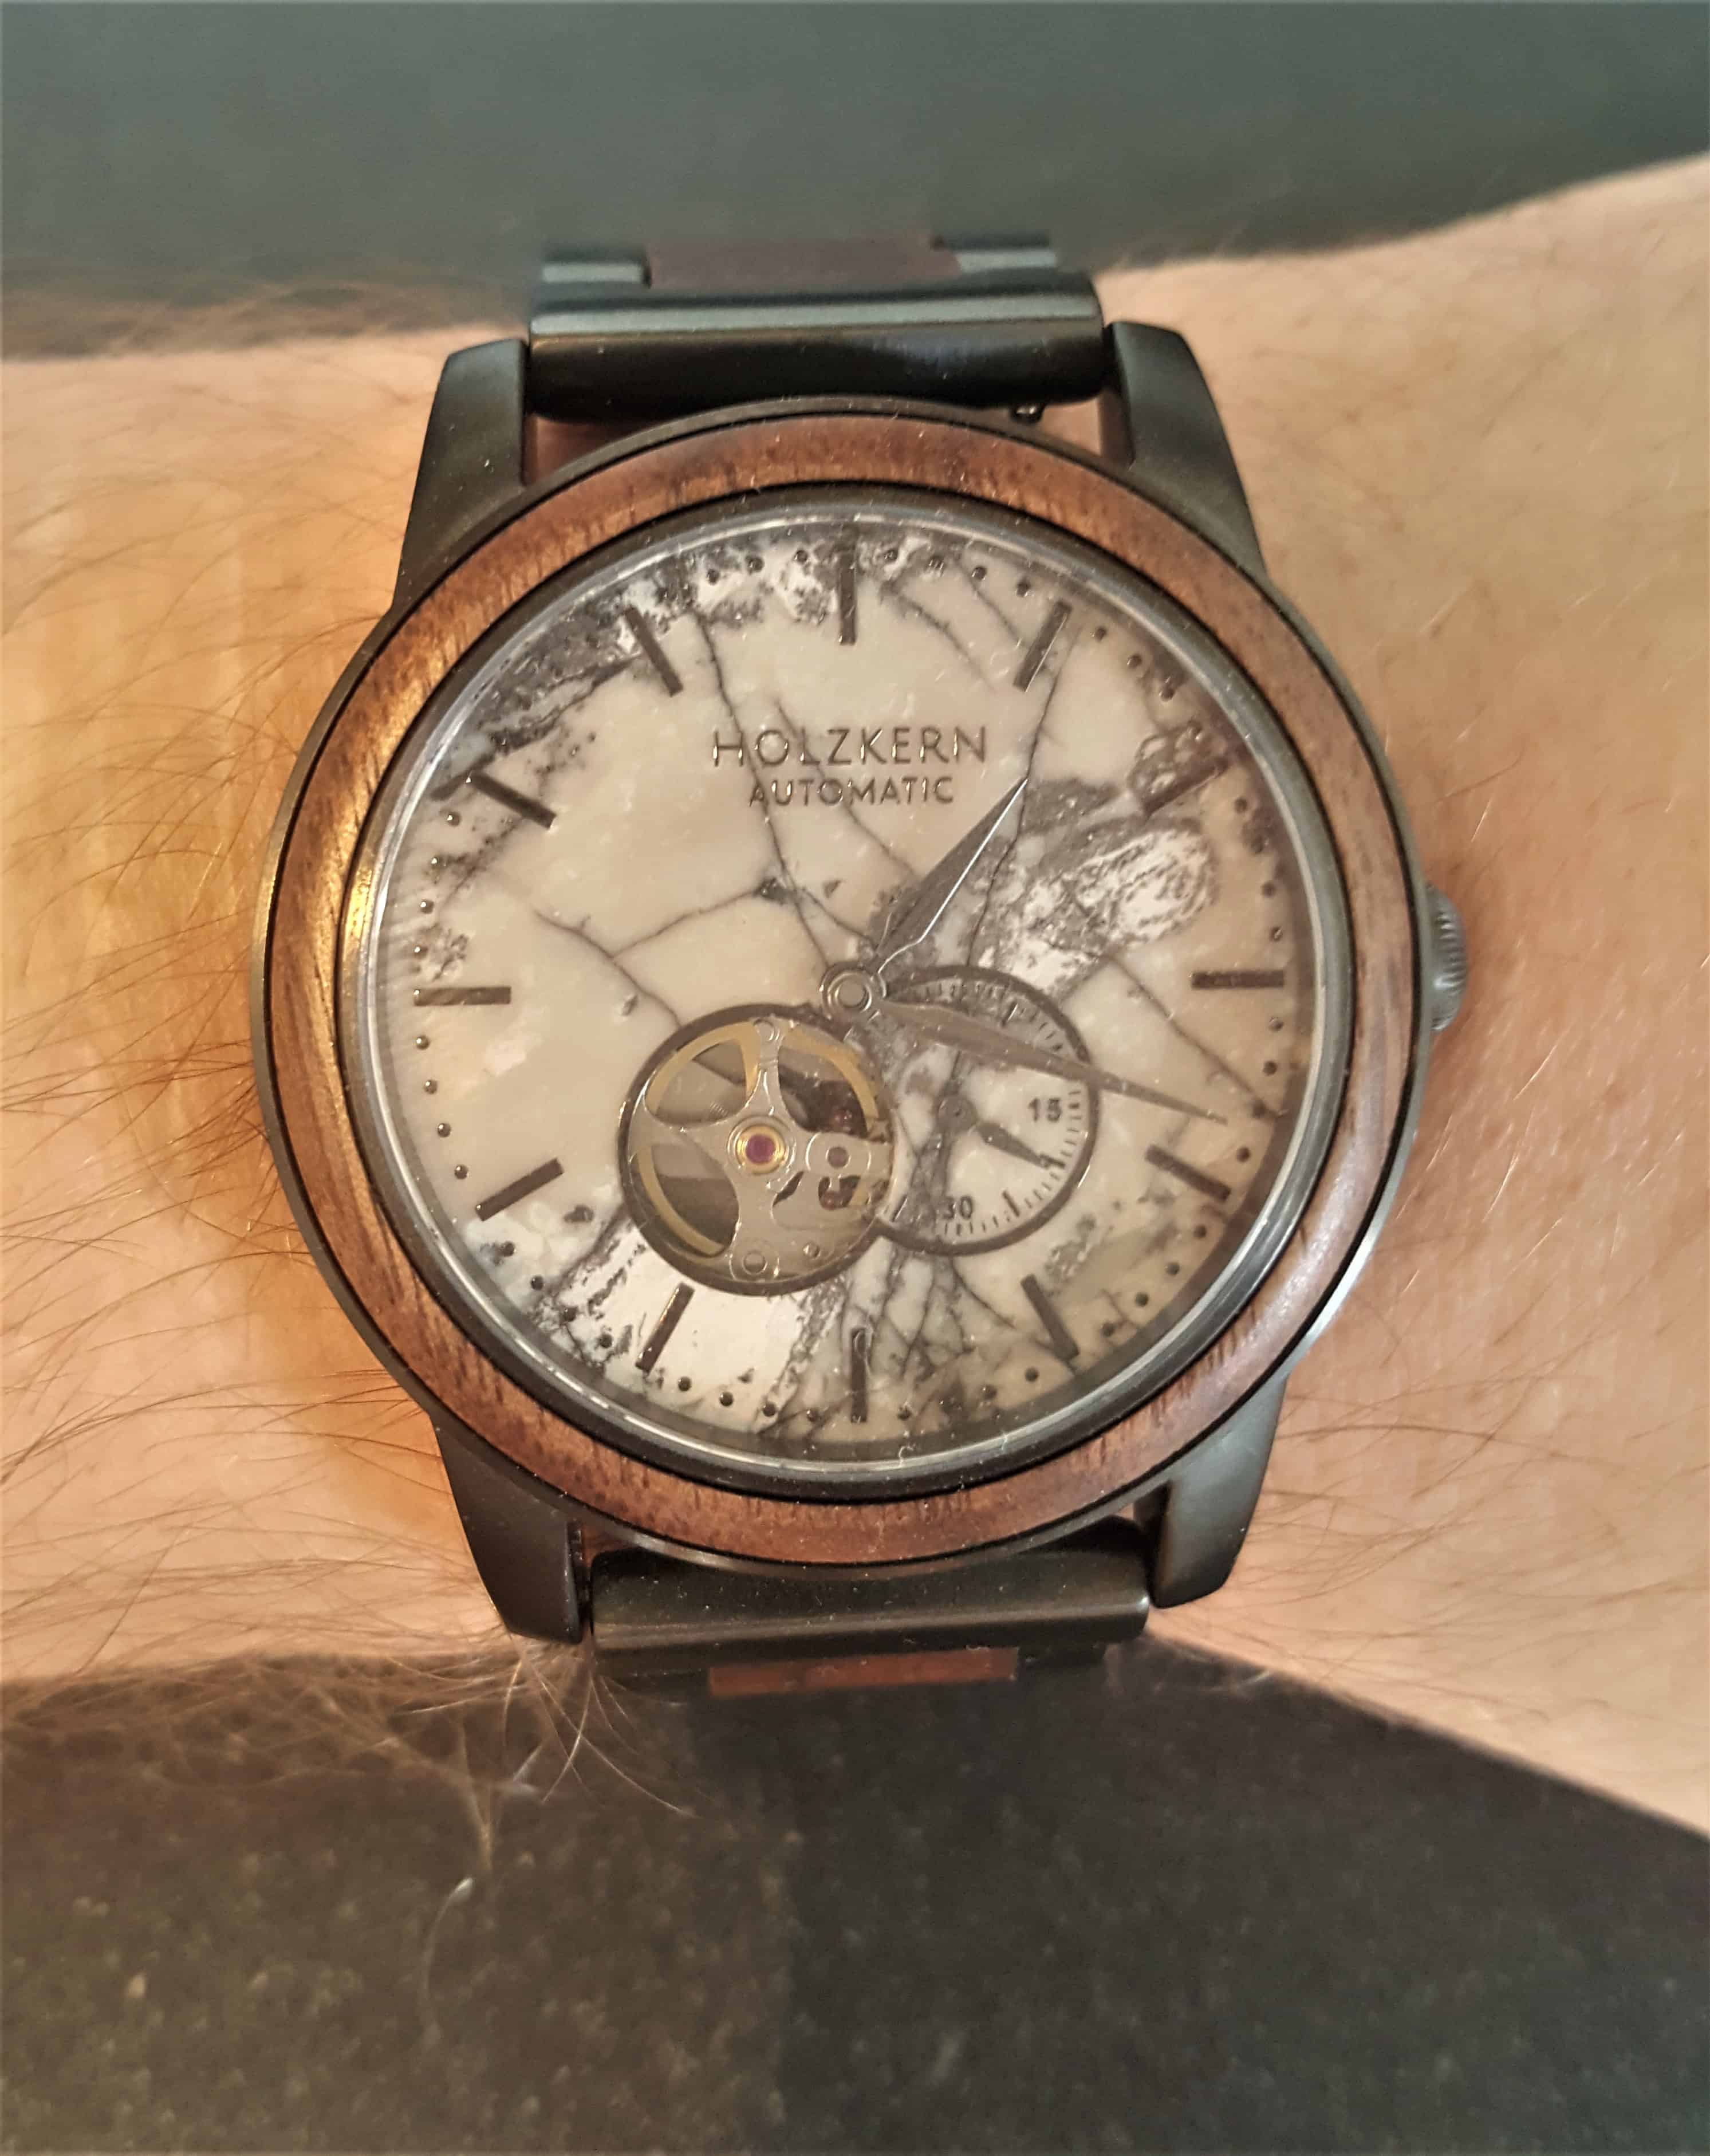 Holzkern Watch Review